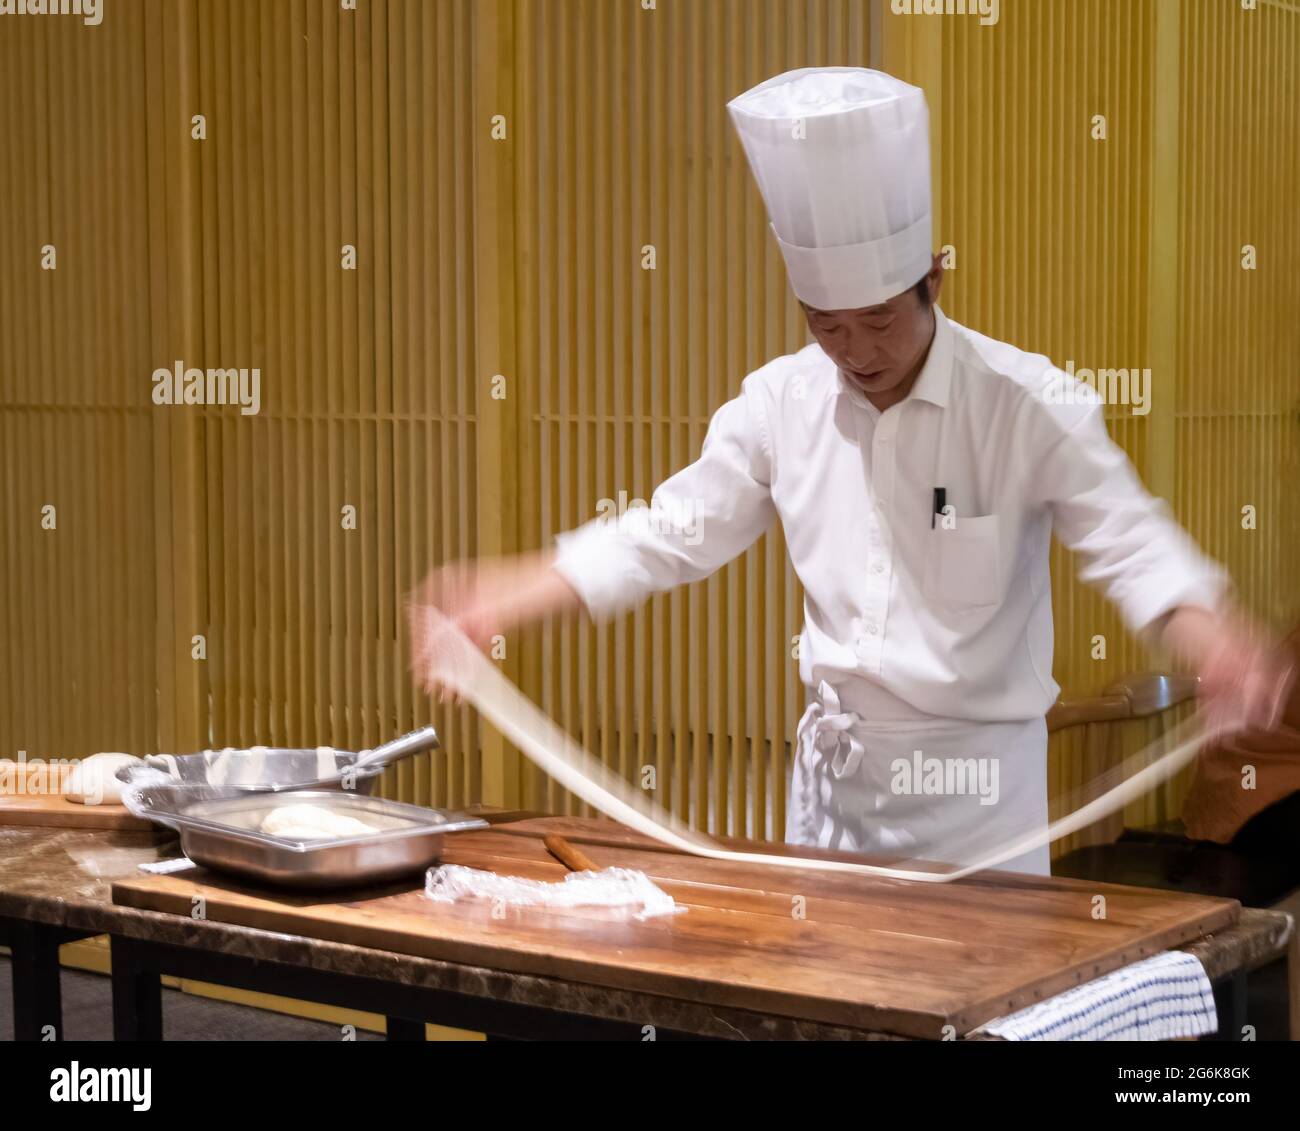 A chef makes biang biang noodles, also known as 'belt' noodles because of their thickness and length, in Xi'an, Shaanxi Province, China. Stock Photo